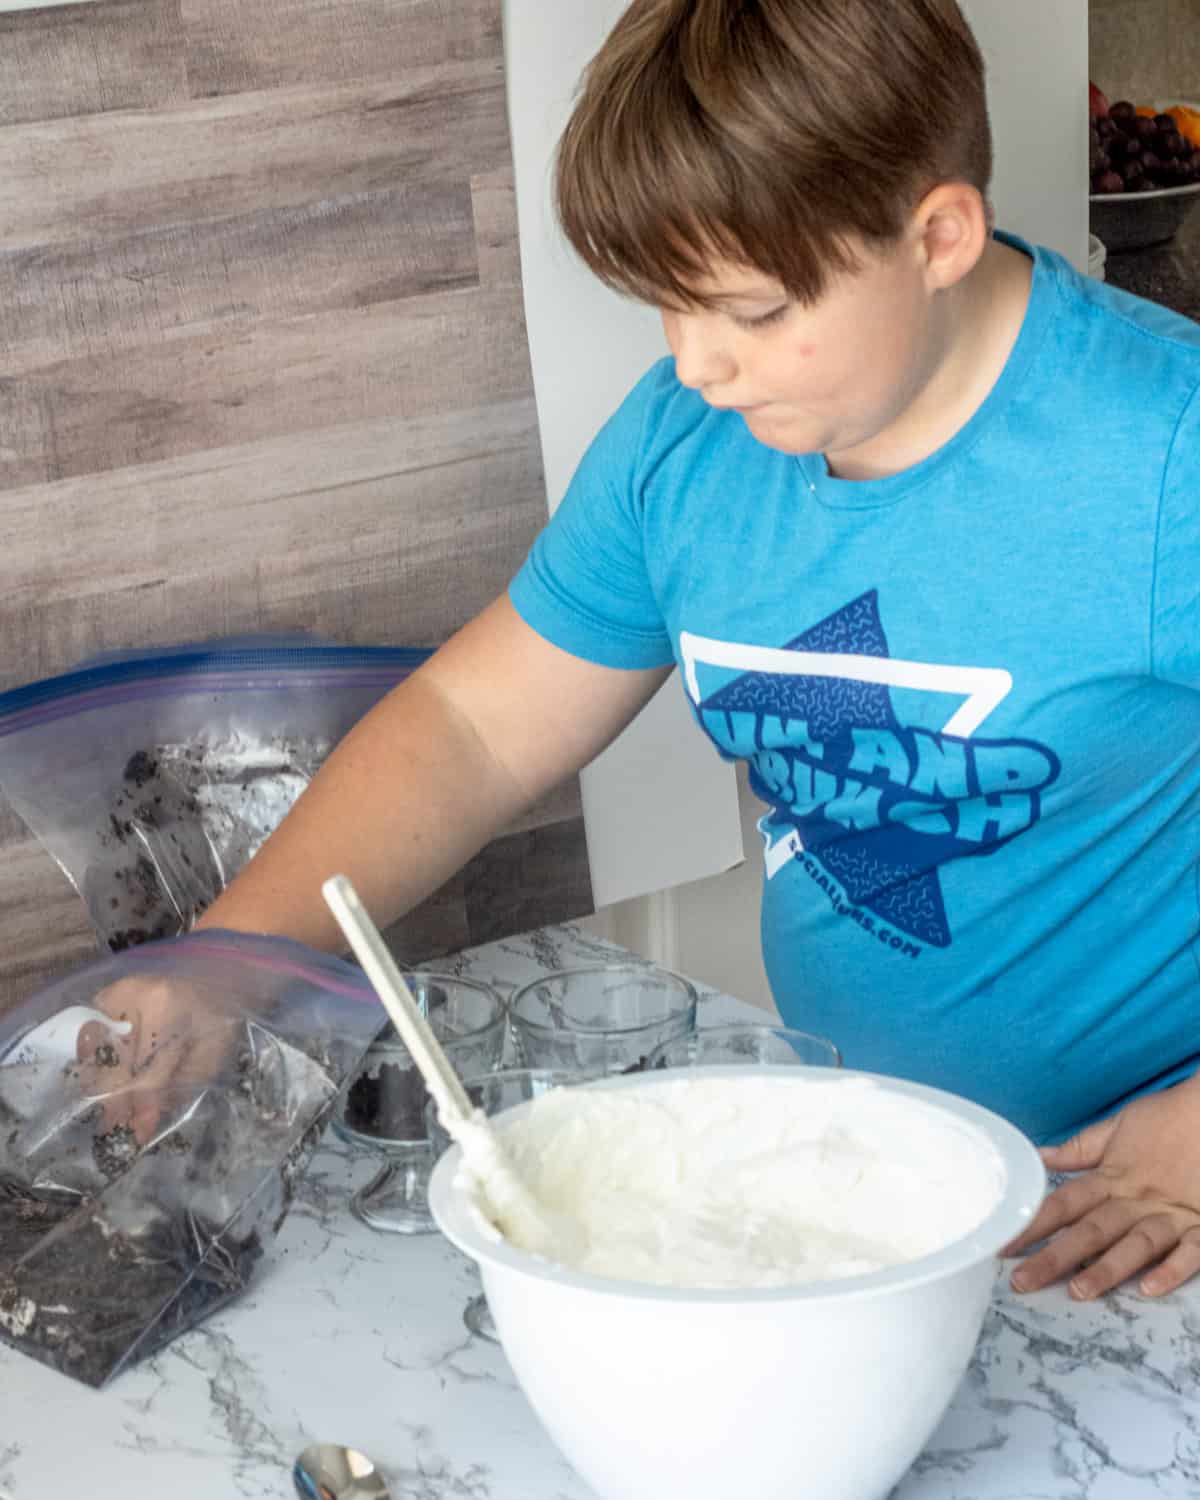 Boy with a blue shirt getting Oreo crumbs from a bag to put into the parfait bowls. A large bowl of whipped filling is next to him.